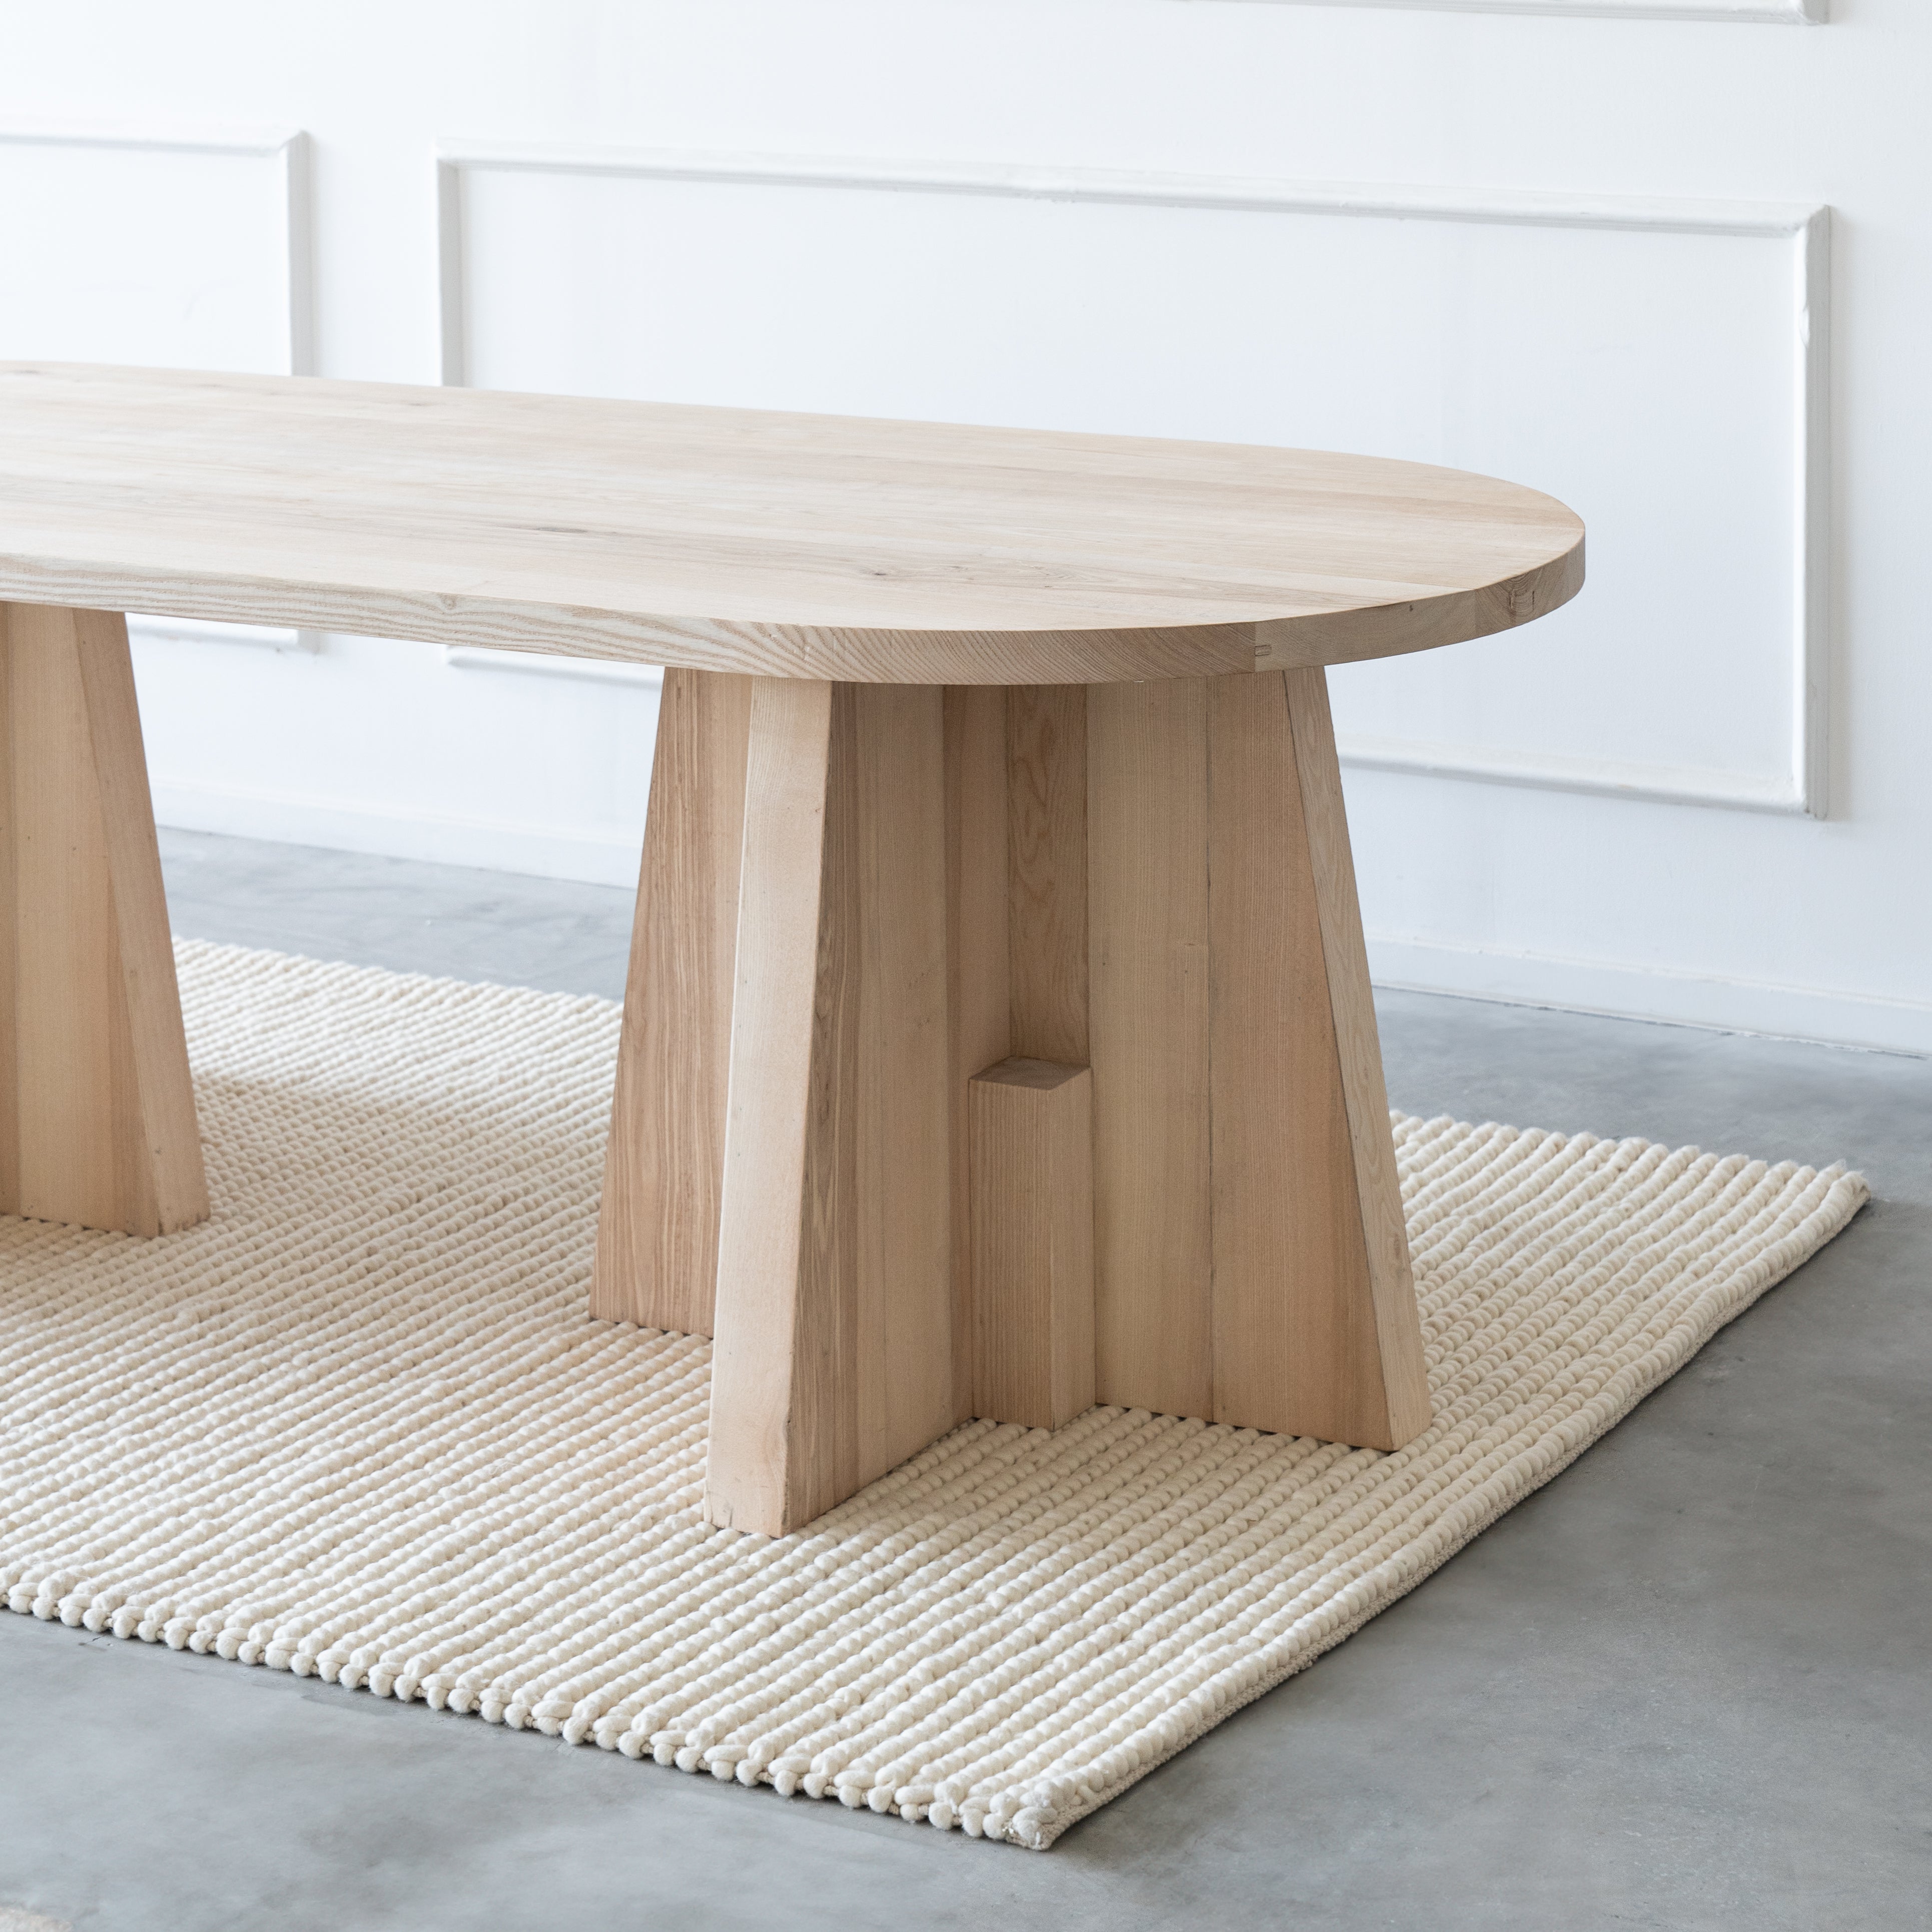 Lego Natural Solid Oak Wood Oval Dining Table  - WS Living - UAE - Dining Tables Wood and steel Furnitures - Dubai